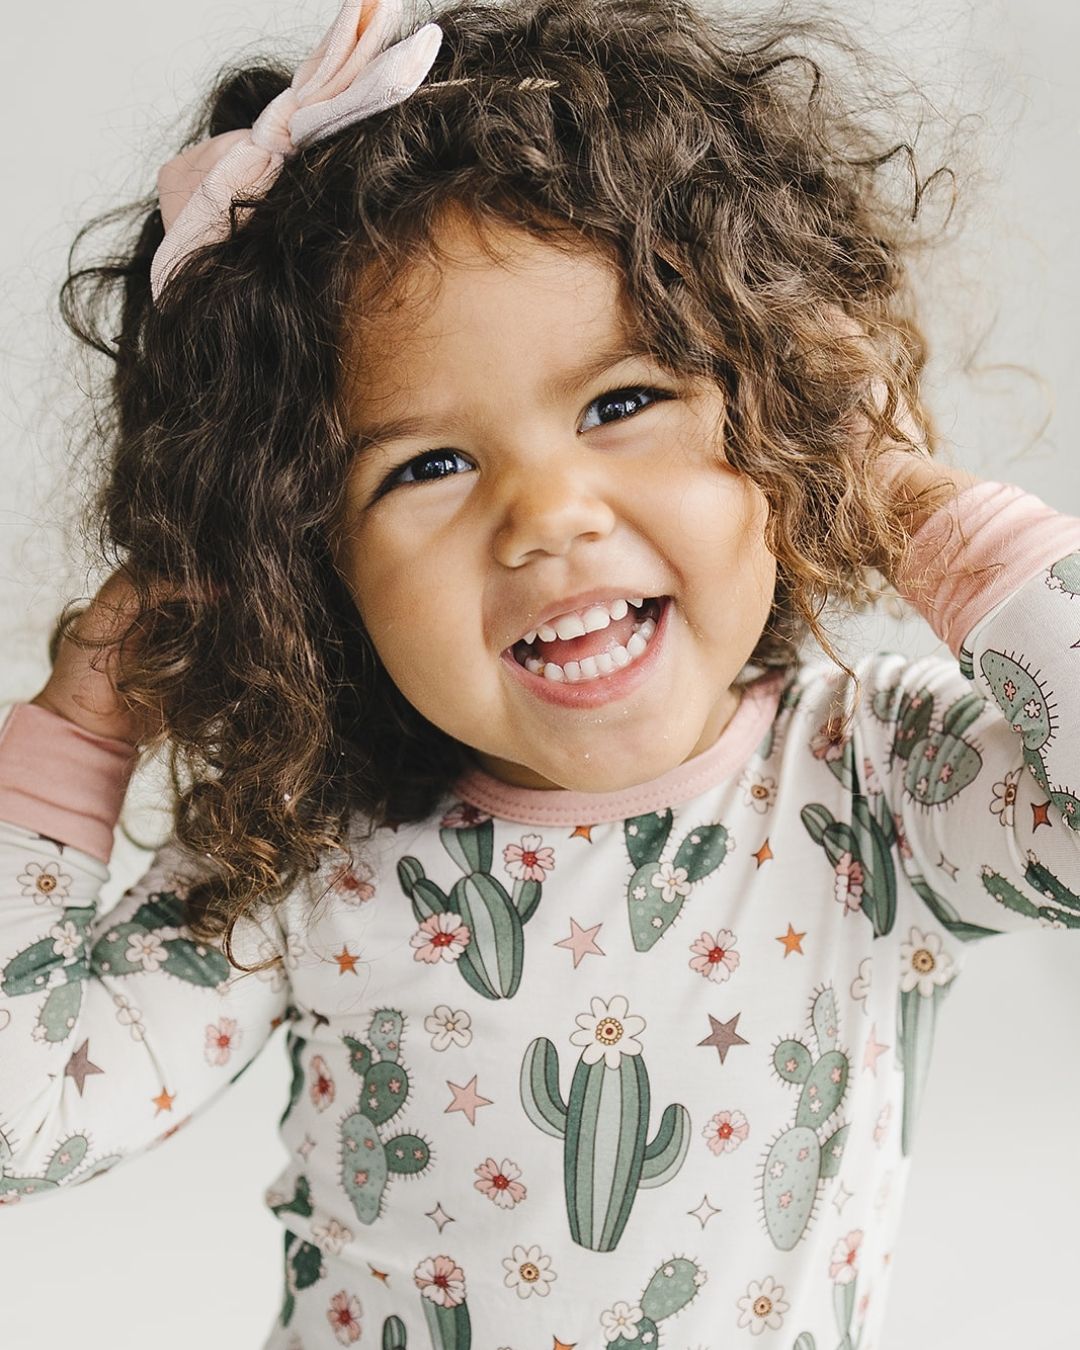 Bamboo Two Piece Set | Cactus Flowers - Romper - LUCKY PANDA KIDS